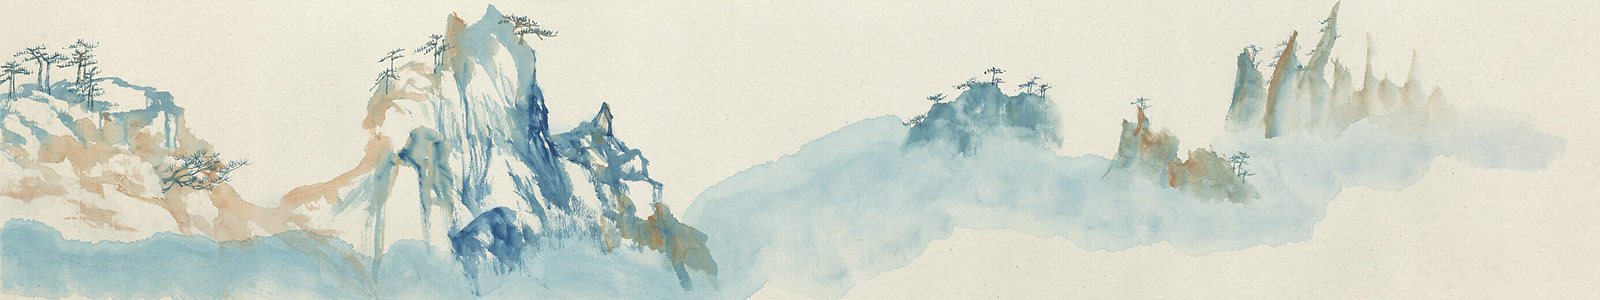 Cultured Legacy: Chinese Paintings and Calligraphy from the Chang Shiu Sig and Tung Shui Wah Collection